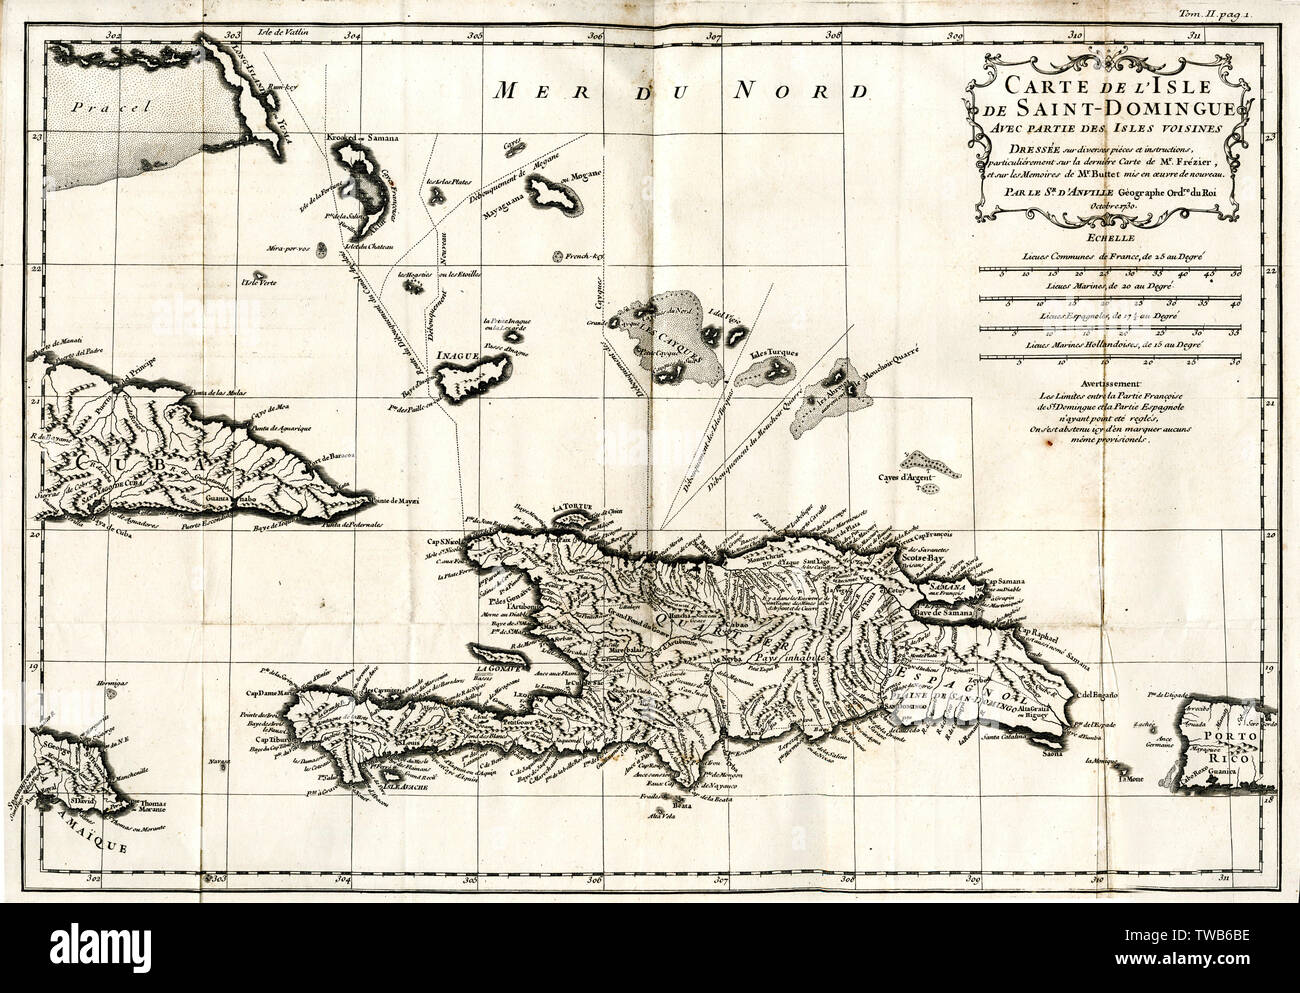 Map of Hispaniola (San Domingo, Haiti), West Indies. The island is now divided into two separate nations: Haiti to the west (French Creole-speaking), and the Dominican Republic to the east (Spanish-speaking). Other islands shown include Jamaica, Cuba, the Bahamas, Turks and Caicos, and Puerto Rico.      Date: 1731 Stock Photo